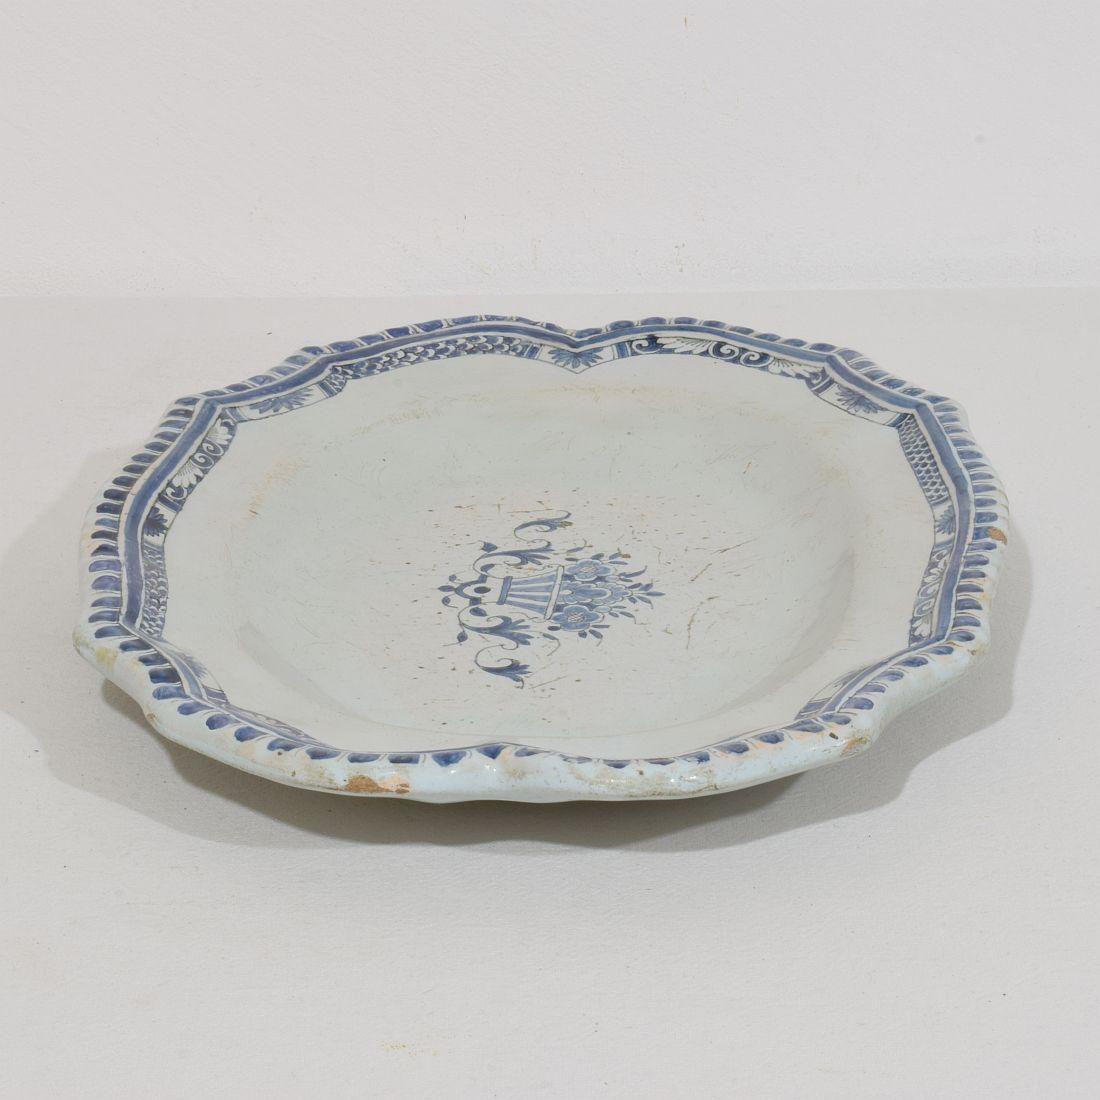 French, 18th Century Glazed Earthenware Rouen Platter For Sale 4